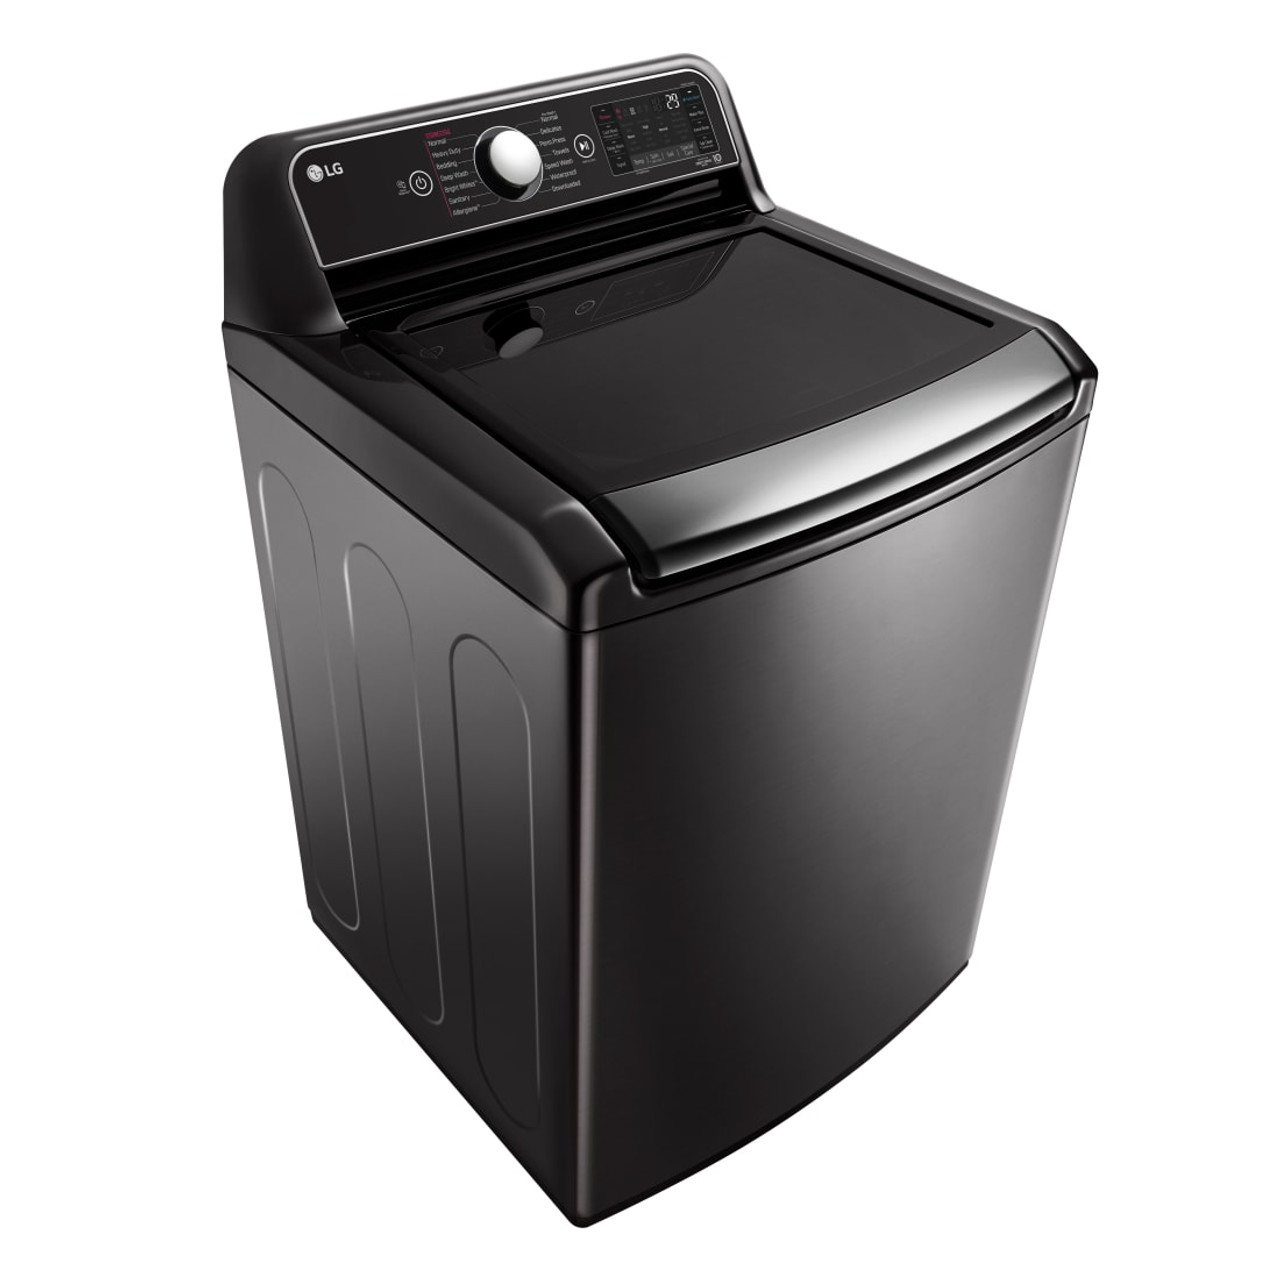 LG 5.5 cu. ft. Wi-Fi Enabled Top Load Washer with TurboWash3D Technology - WT7900HBA